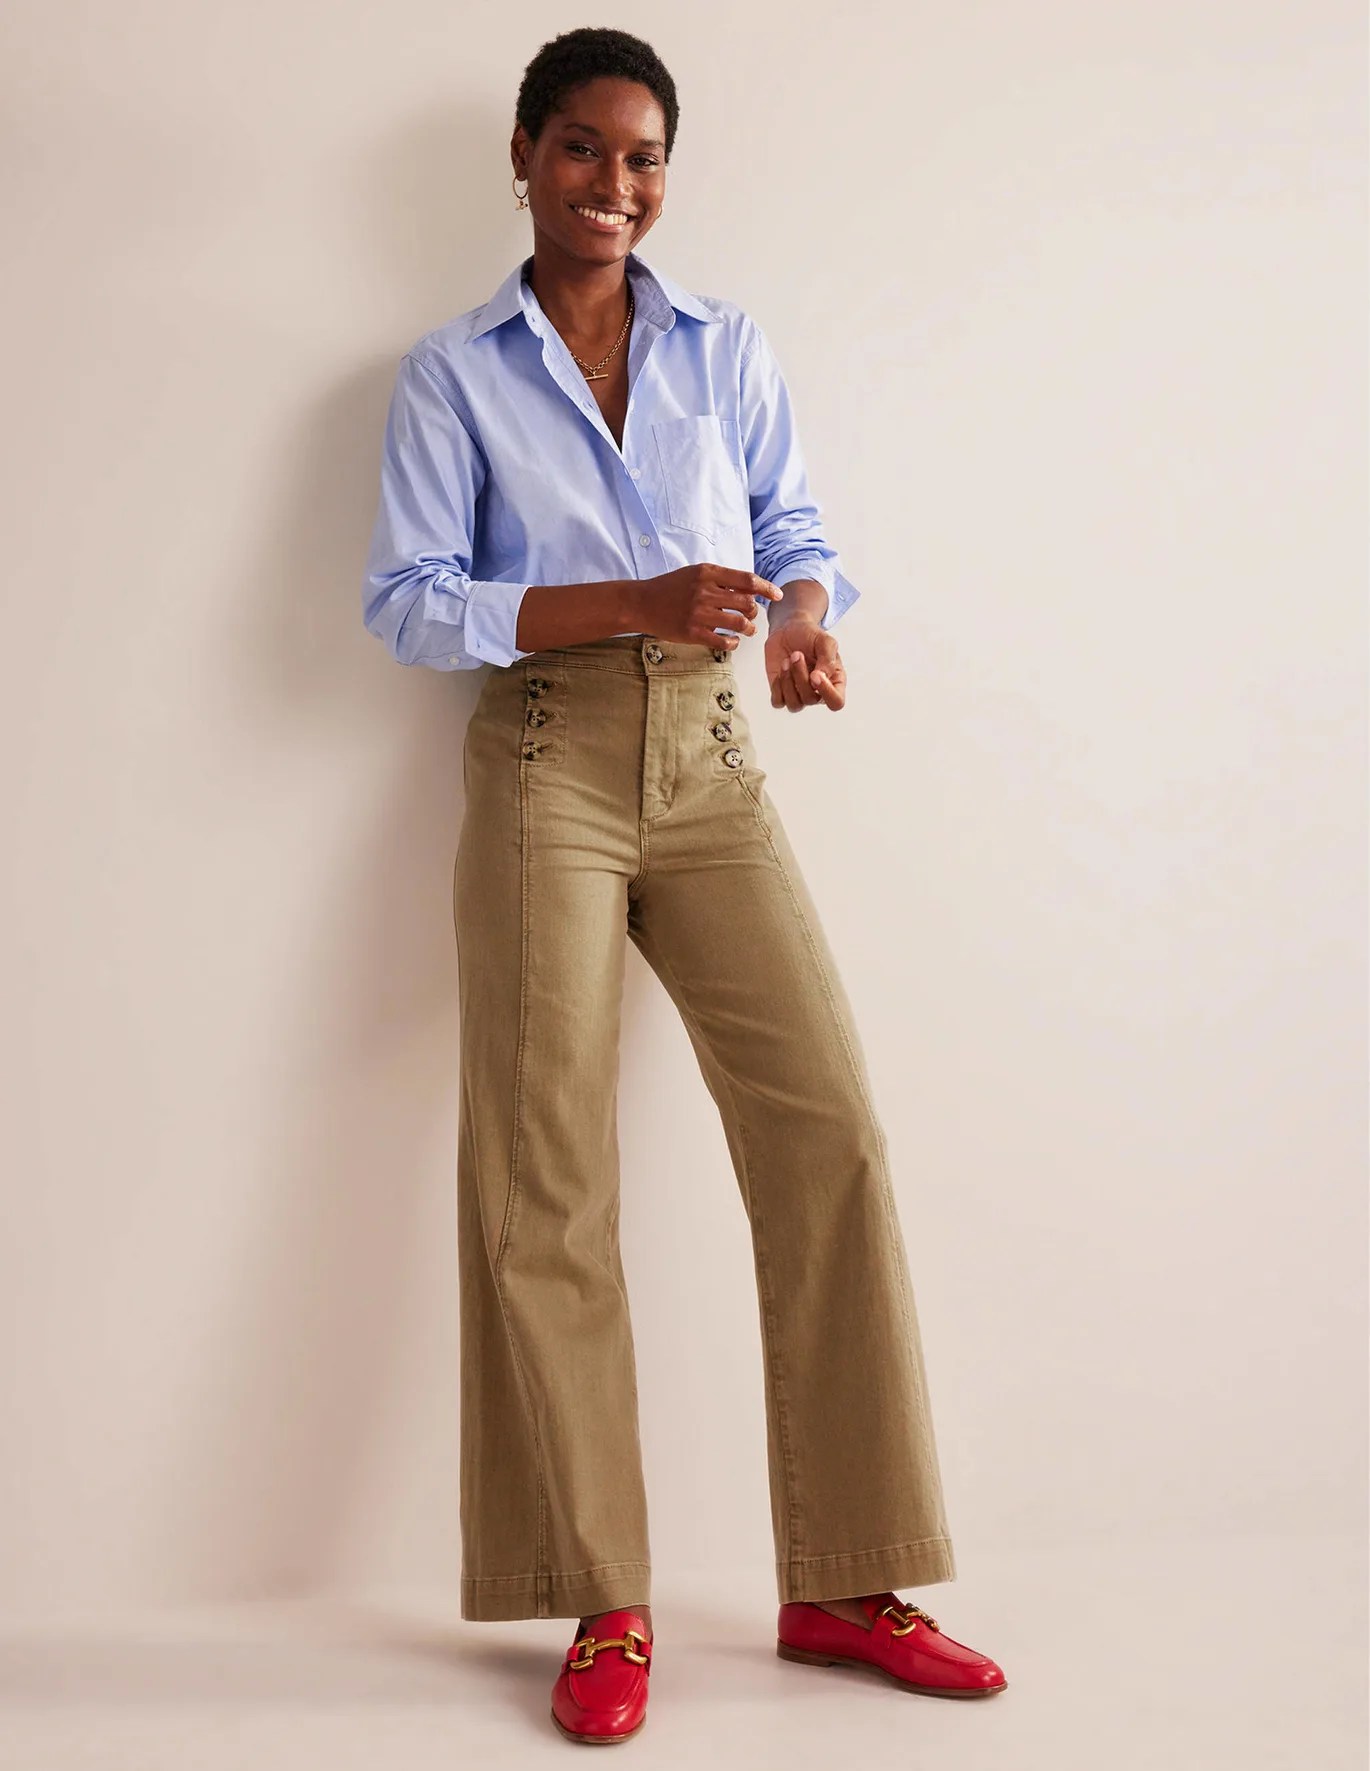 Sailor Flare Pants for a Chic and Trendy Look